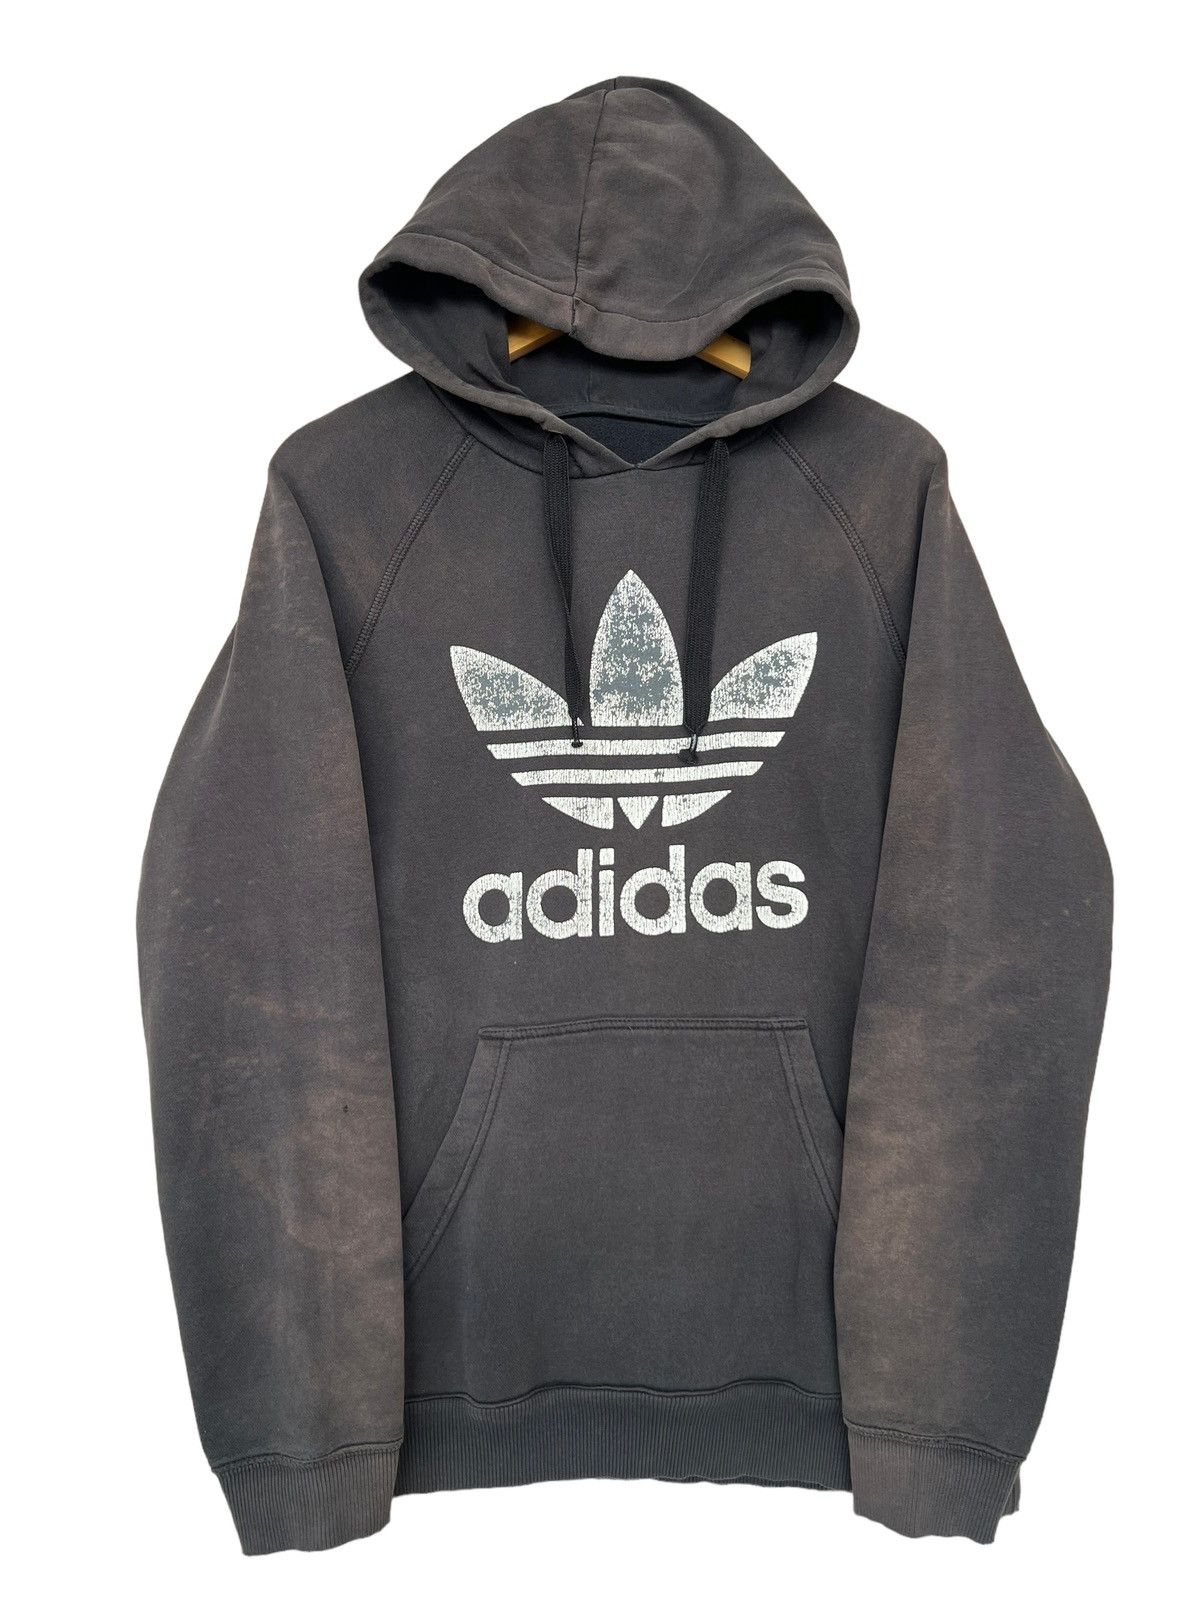 Adidas Distressed Ripped Sunfaded Hoodie - 1